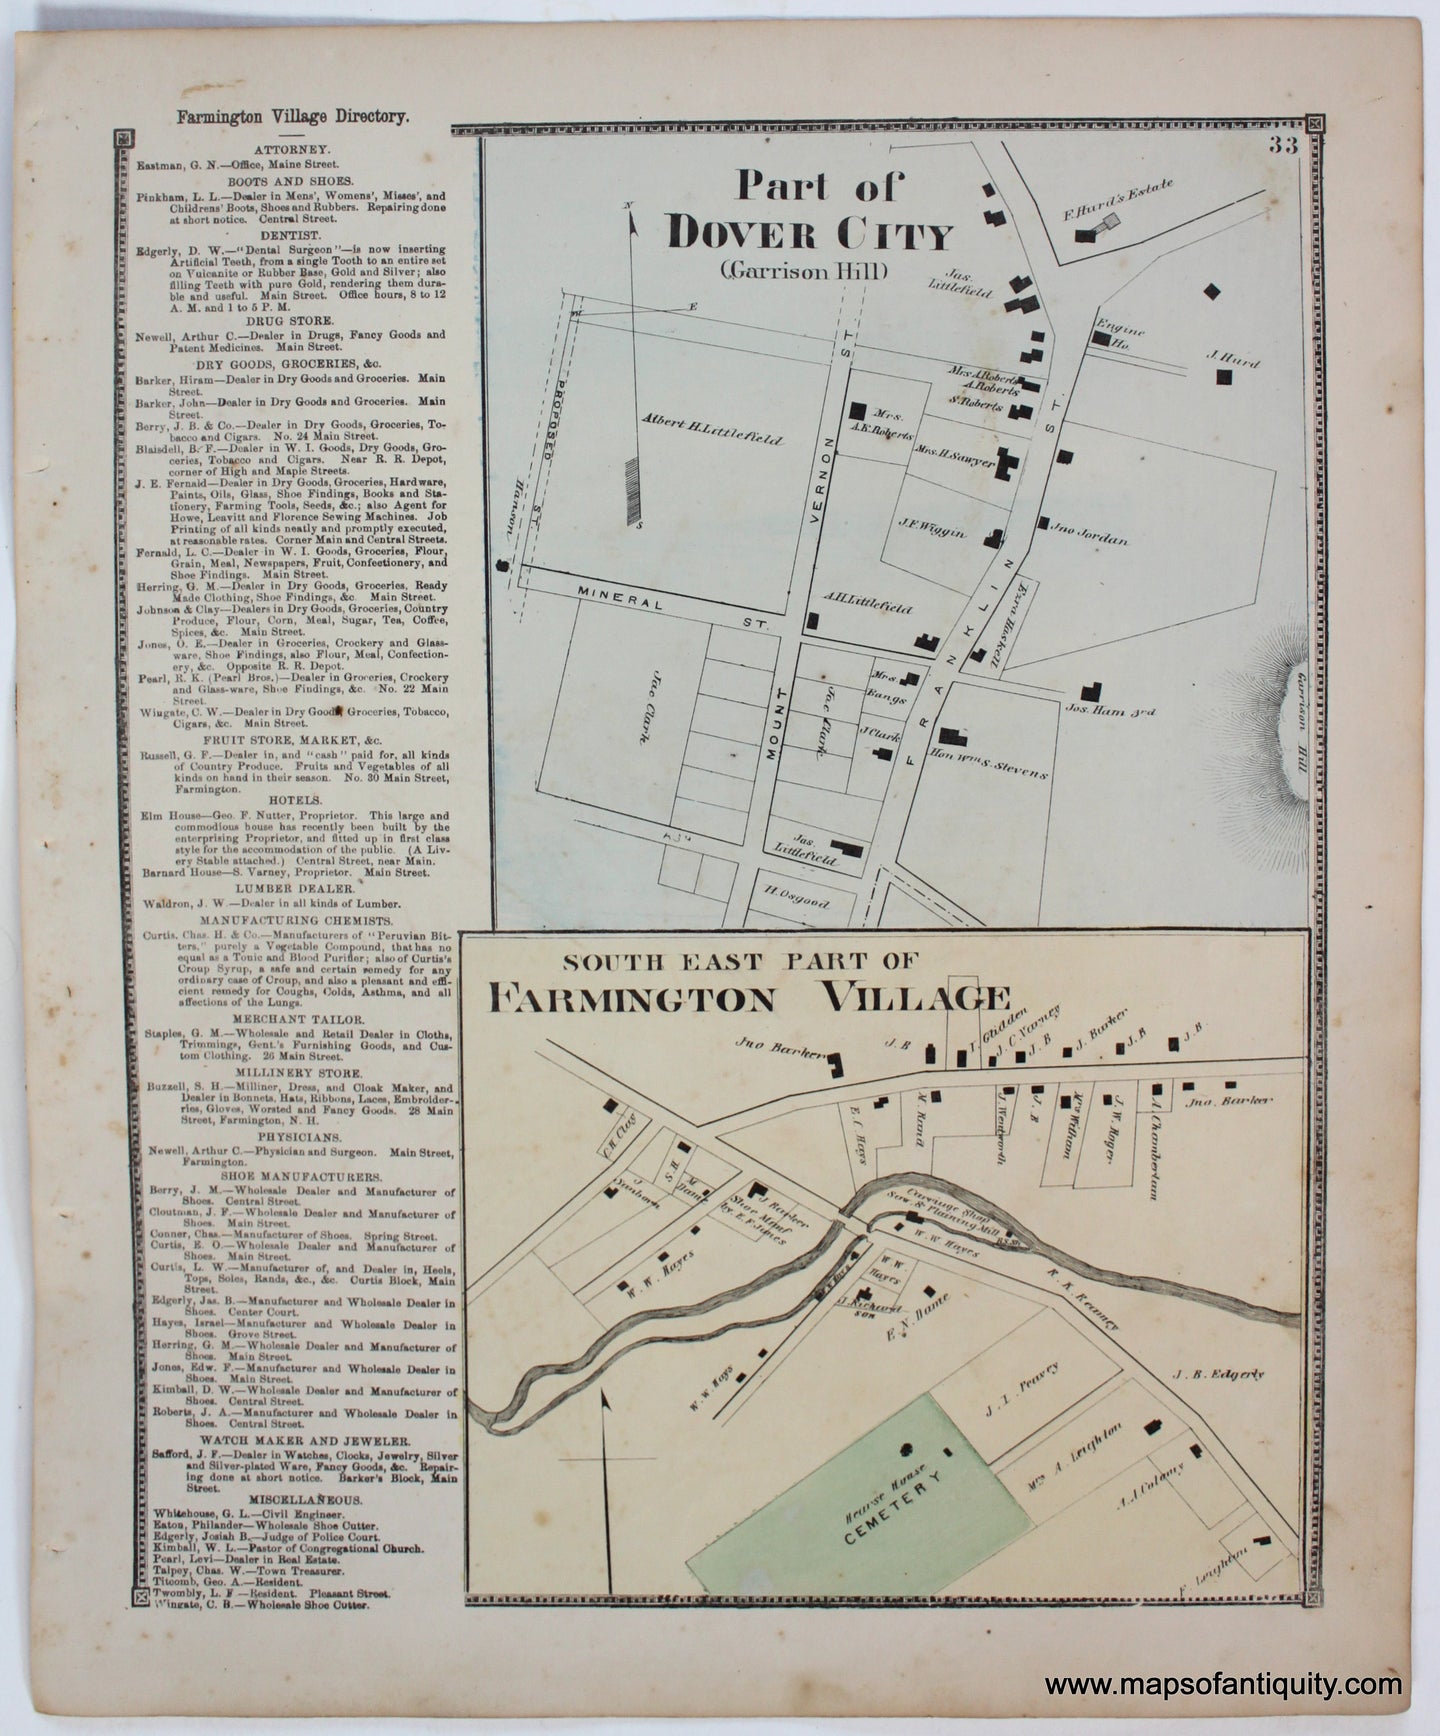 Antique-Map-Part-of-Dover-City-Garrison-Hill-South-East-Part-of-Farmington-Village-Strafford-County-Town-Towns-New-Hampshire-NH-Sanford-Everts-1871-1870s-1800s-Mid-Late-19th-Century-Maps-of-Antiquity